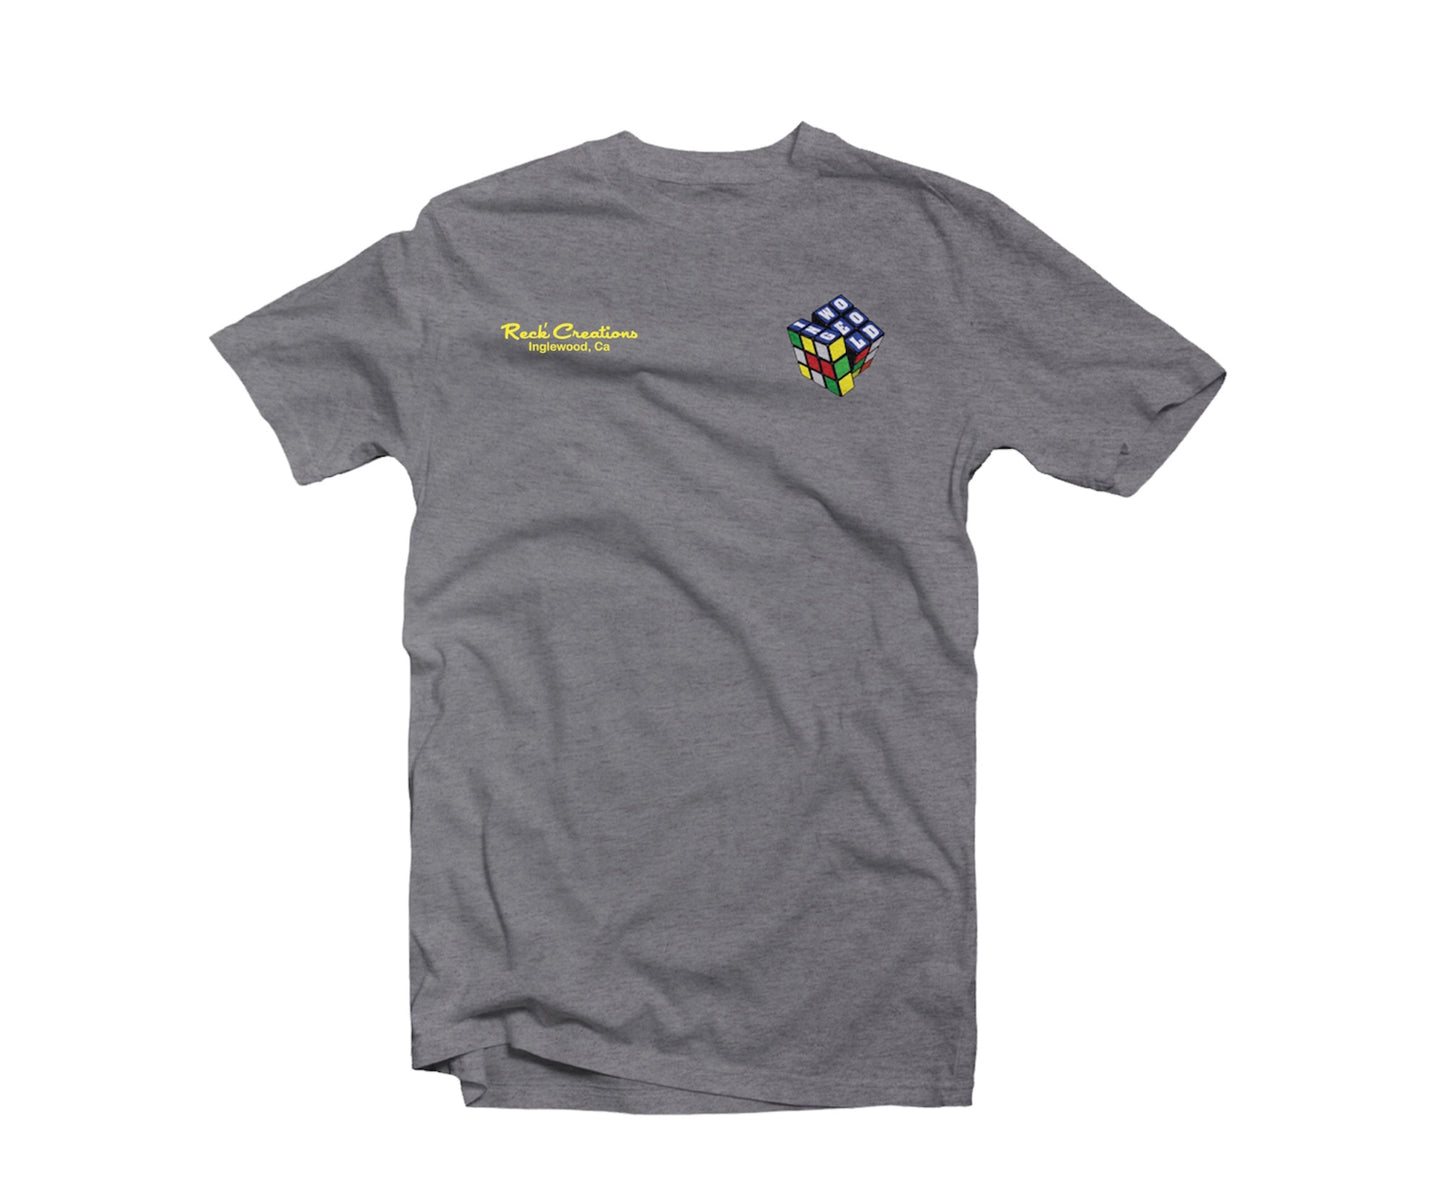 Cube Vision Tee - grey/multi color